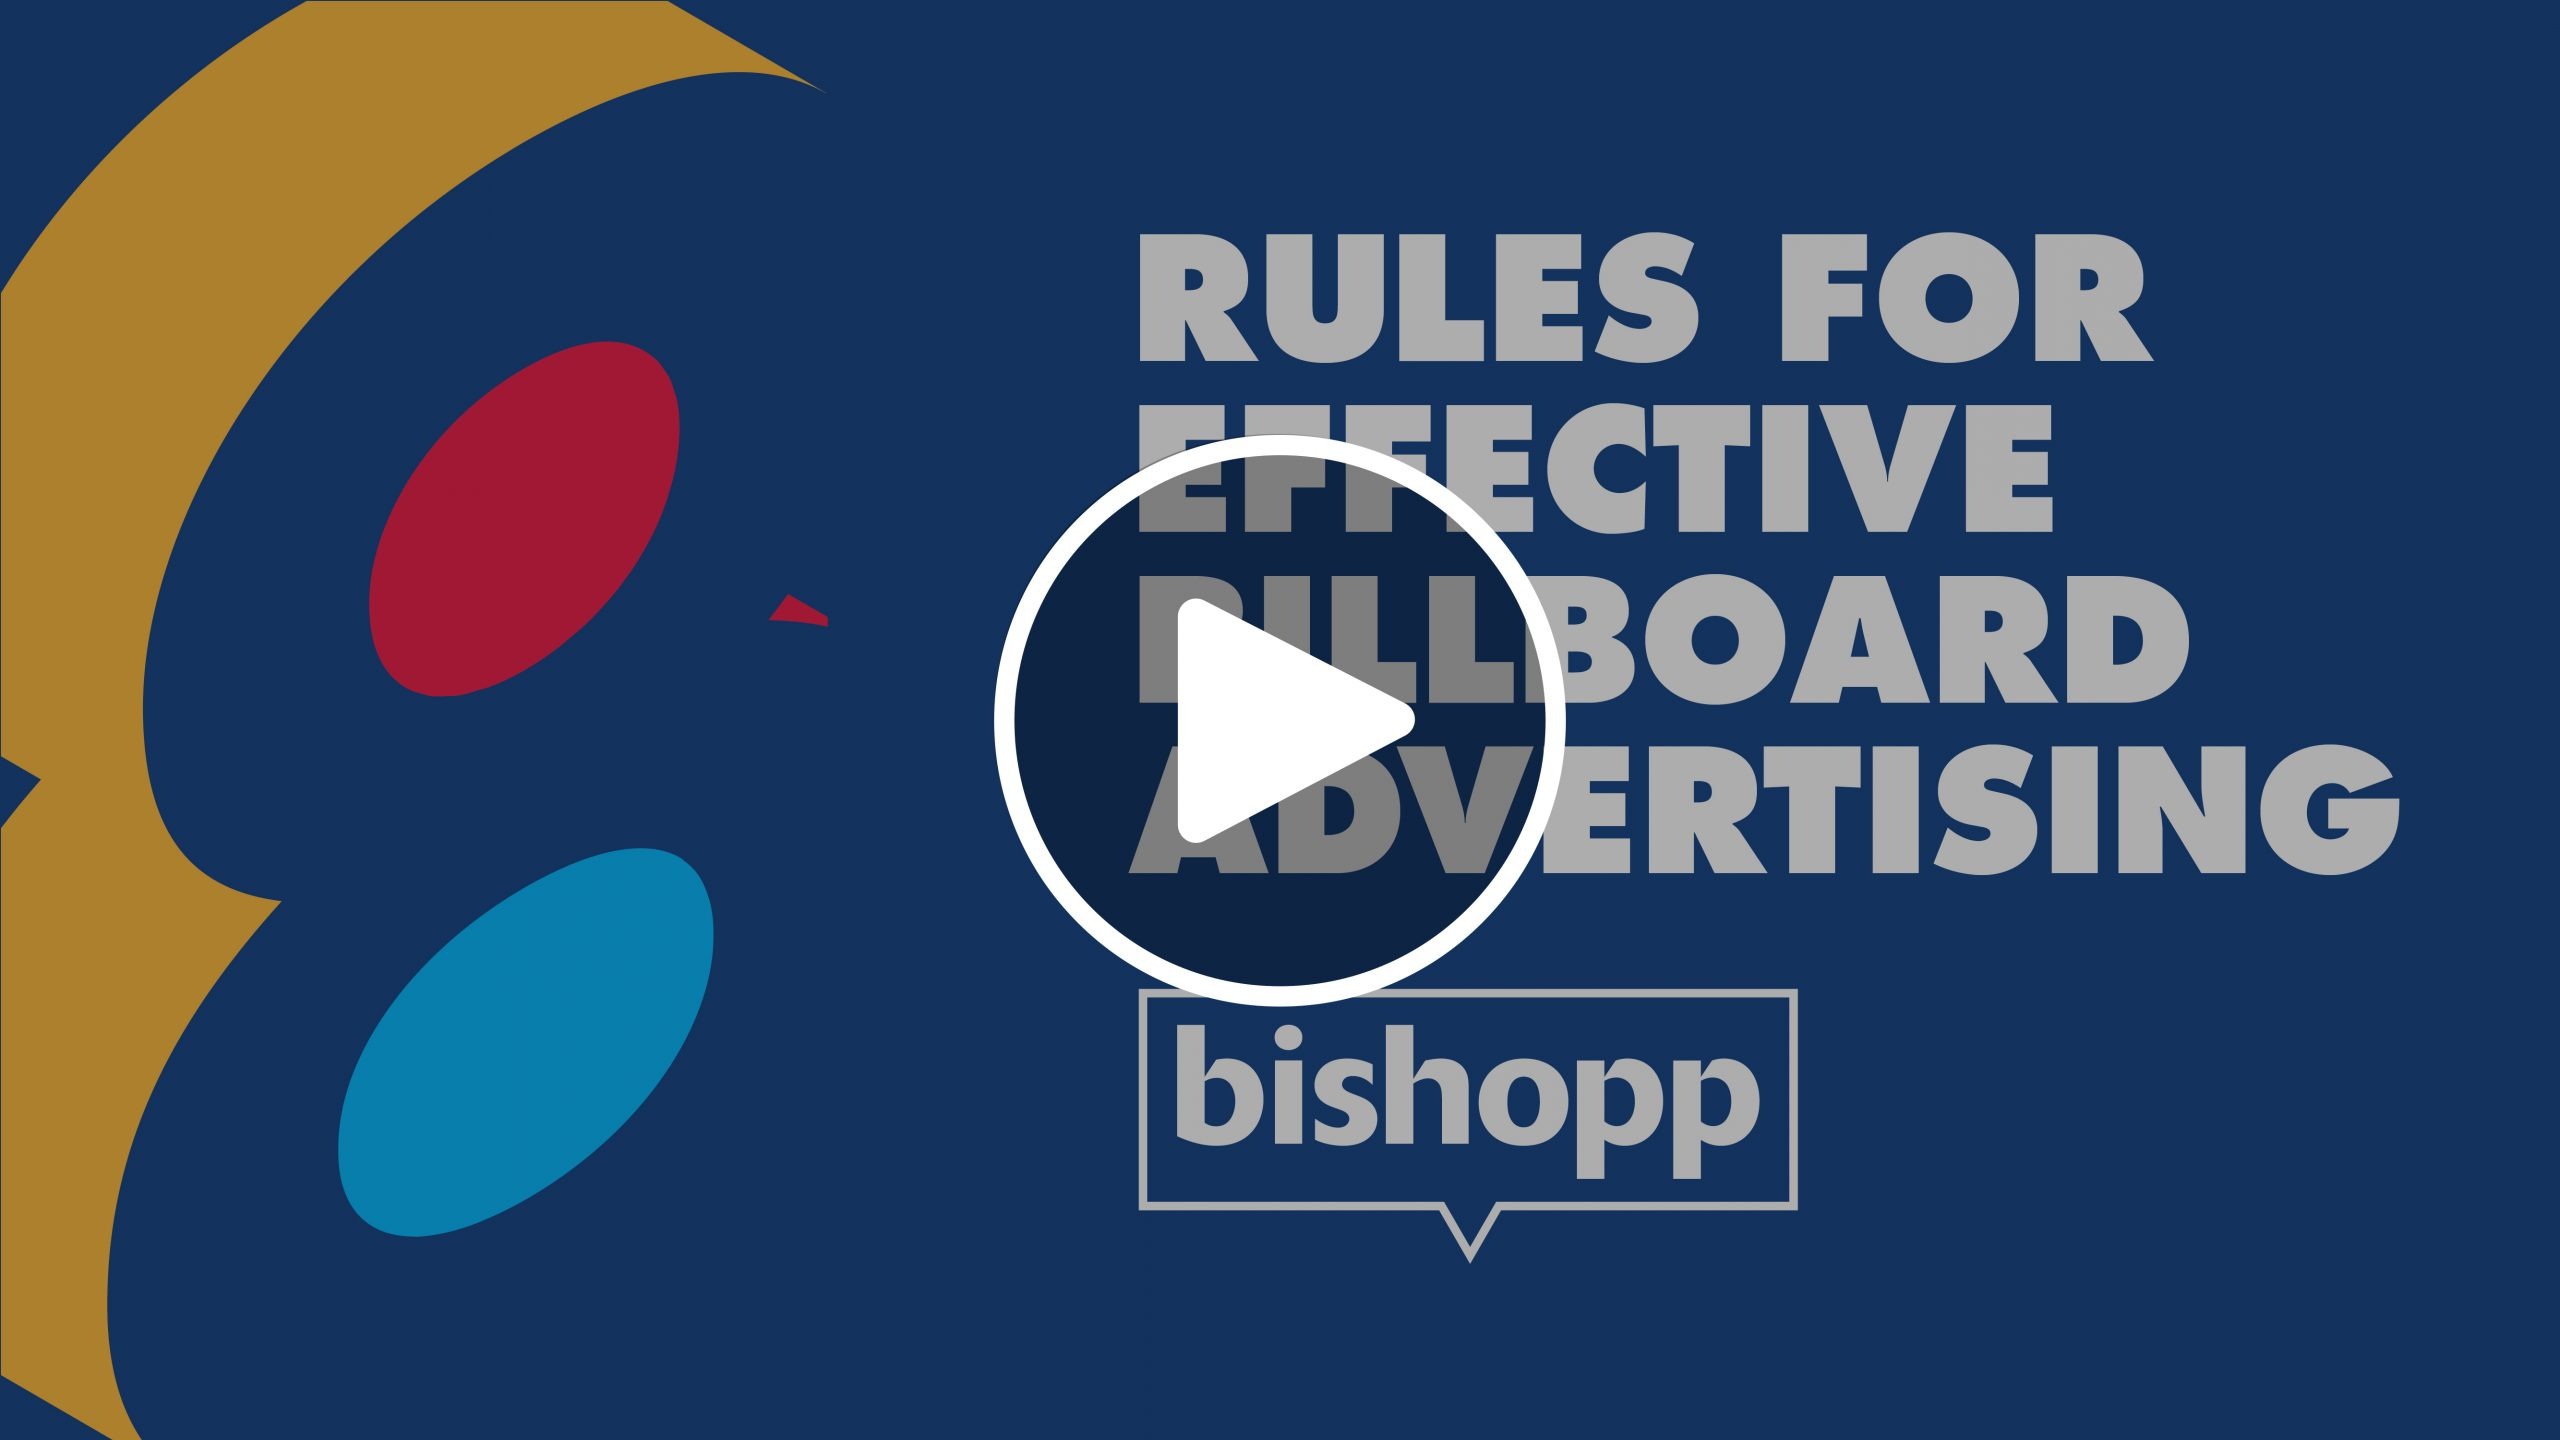 8 Rules For Effective Billboard Advertising